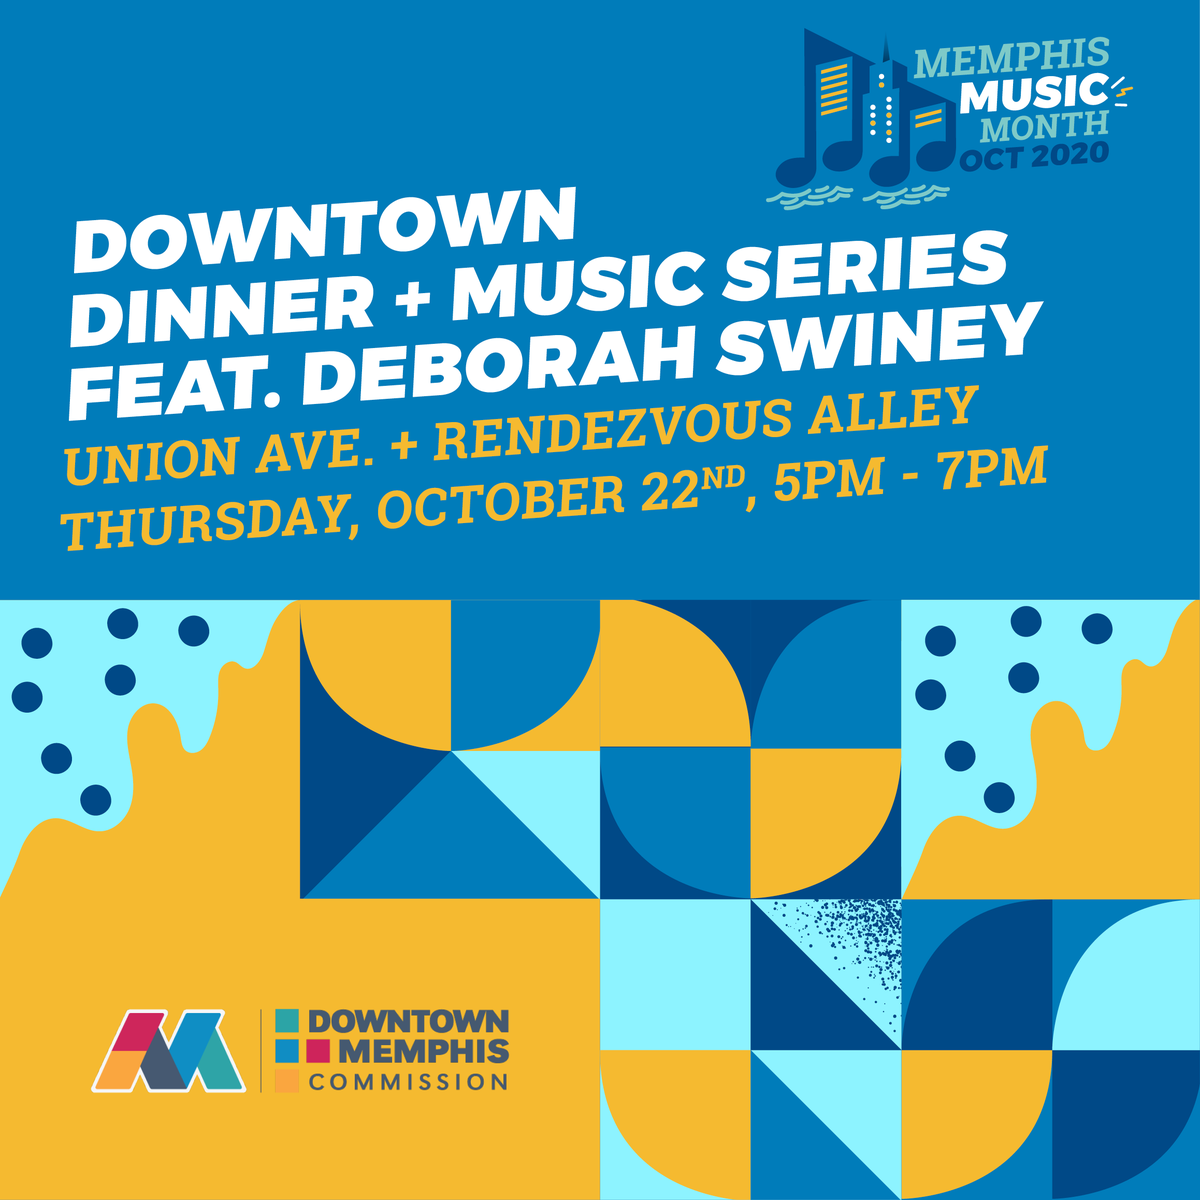 Celebrate #MemphisMusicMonth! Enjoy safely distanced, outdoor, and unplugged live music THURS. 10/22 from 5P- 7P.

Be sure to check out #DeborahSwiney near @curfewmemphis #curfewmemphis 🎉

l8r.it/U8aH
#DowntownMemphis